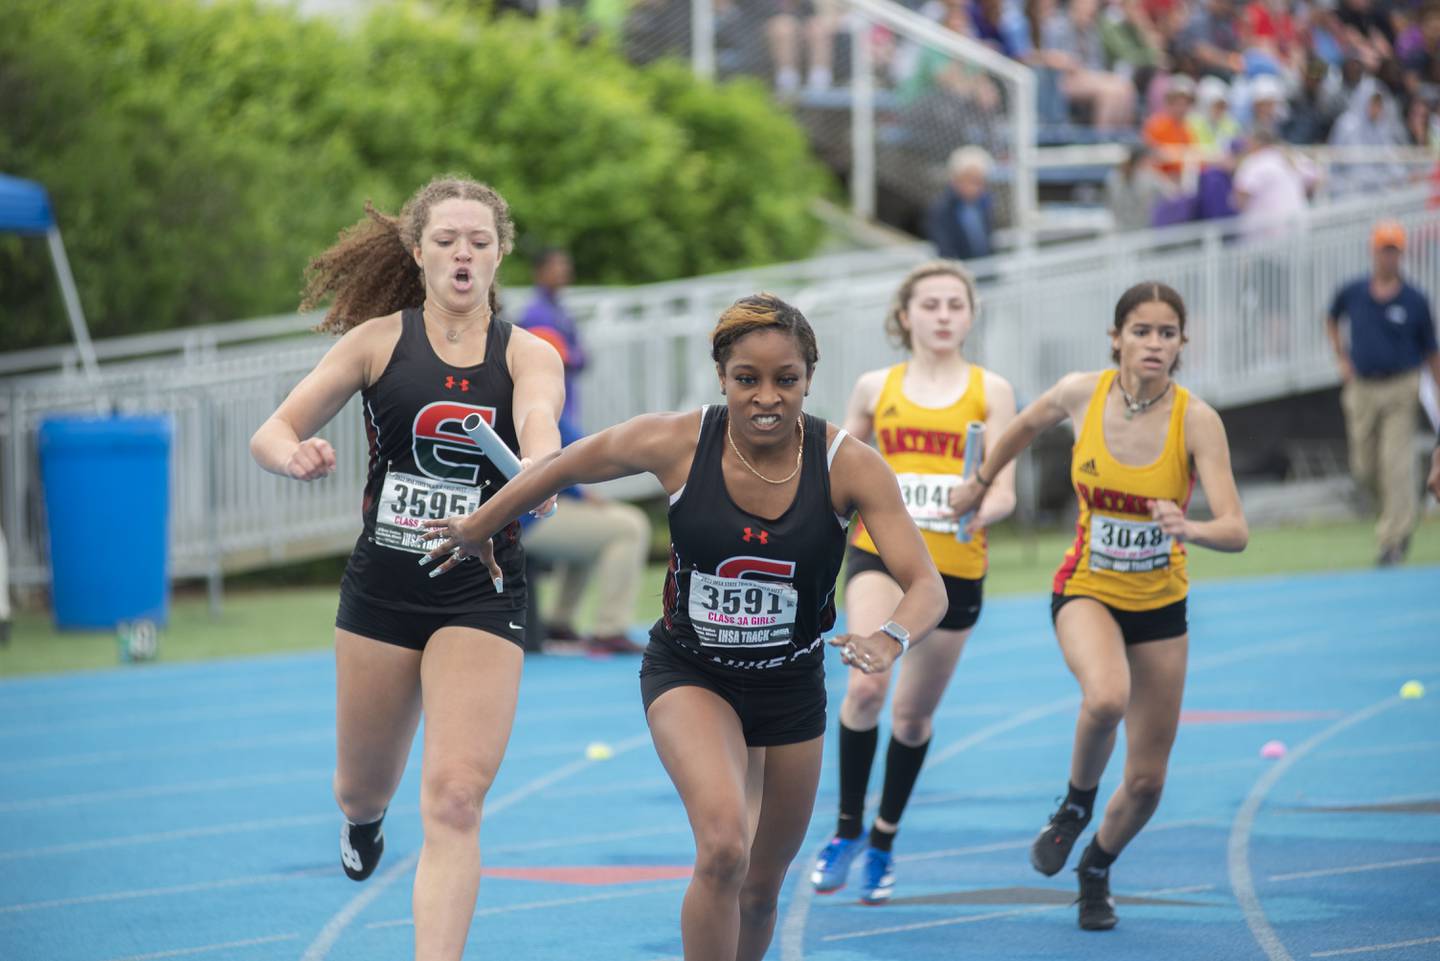 Plainfield East's D'aria Christian (right) Elissa Perkins competes in the 3A 4x2 finals during the IHSA girls state championships, Saturday, May 21, 2022 in Charleston.